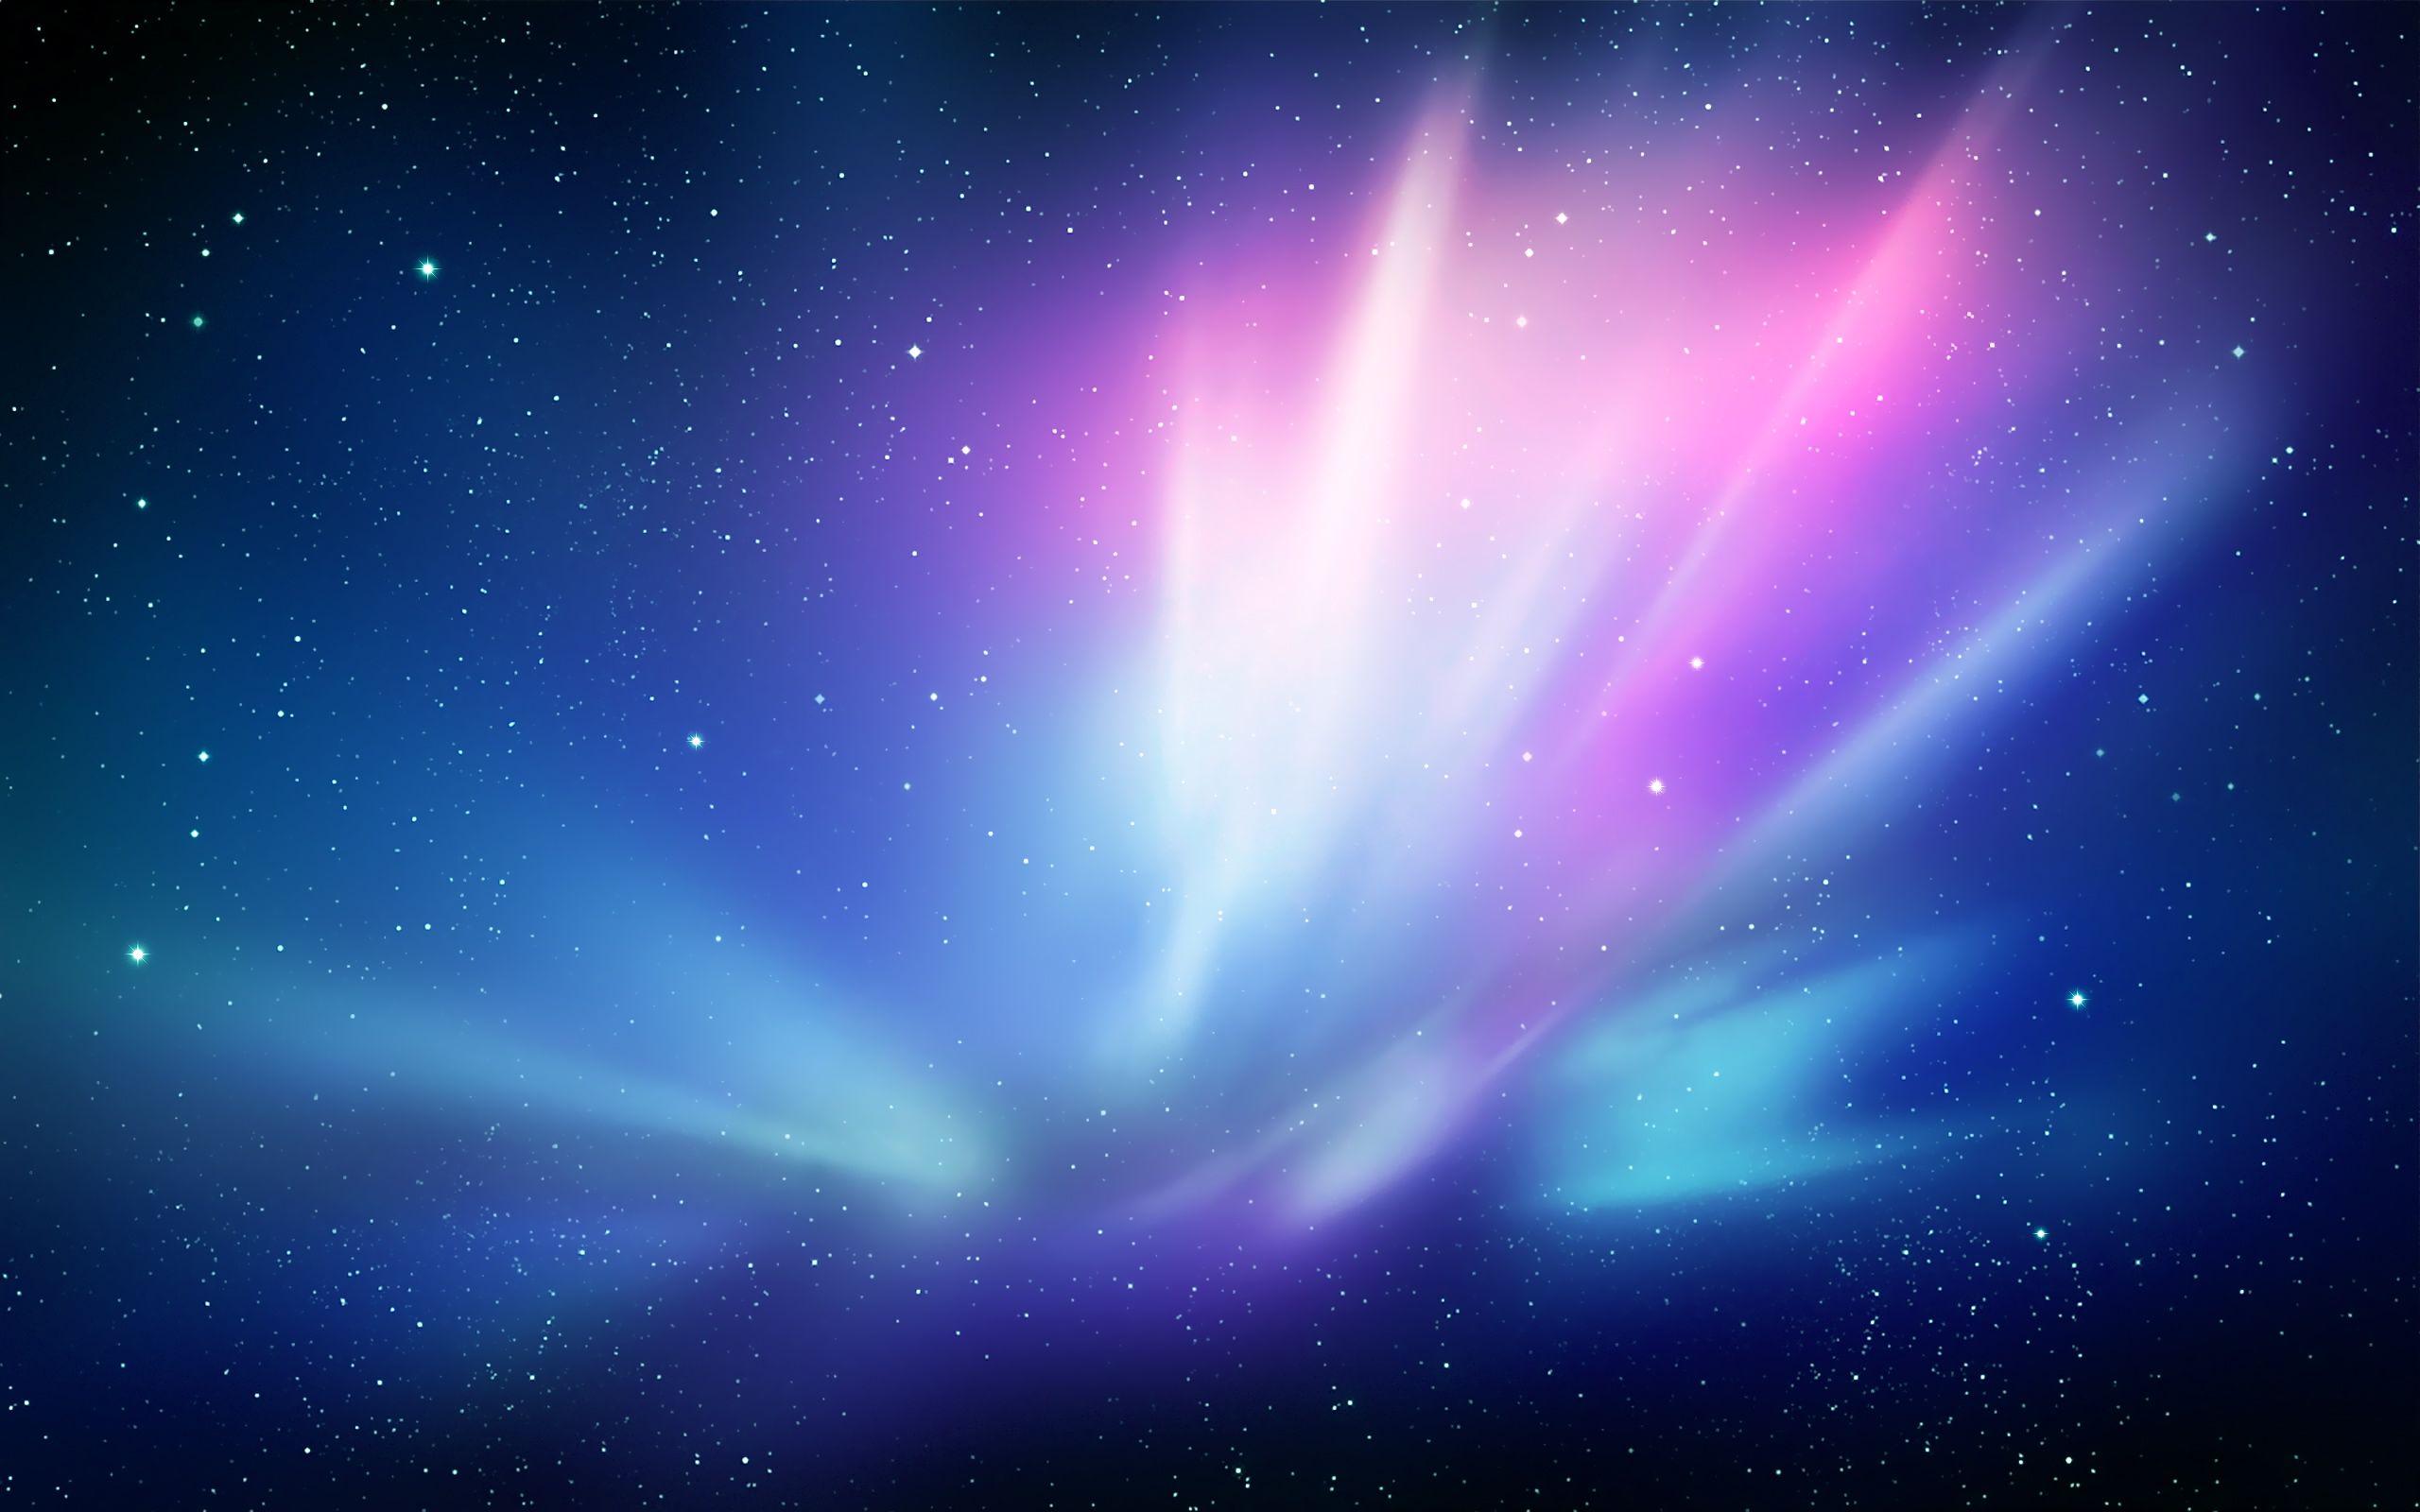 Apple Photoshopped a Galaxy Out of Its Default Wallpaper Photo  PetaPixel